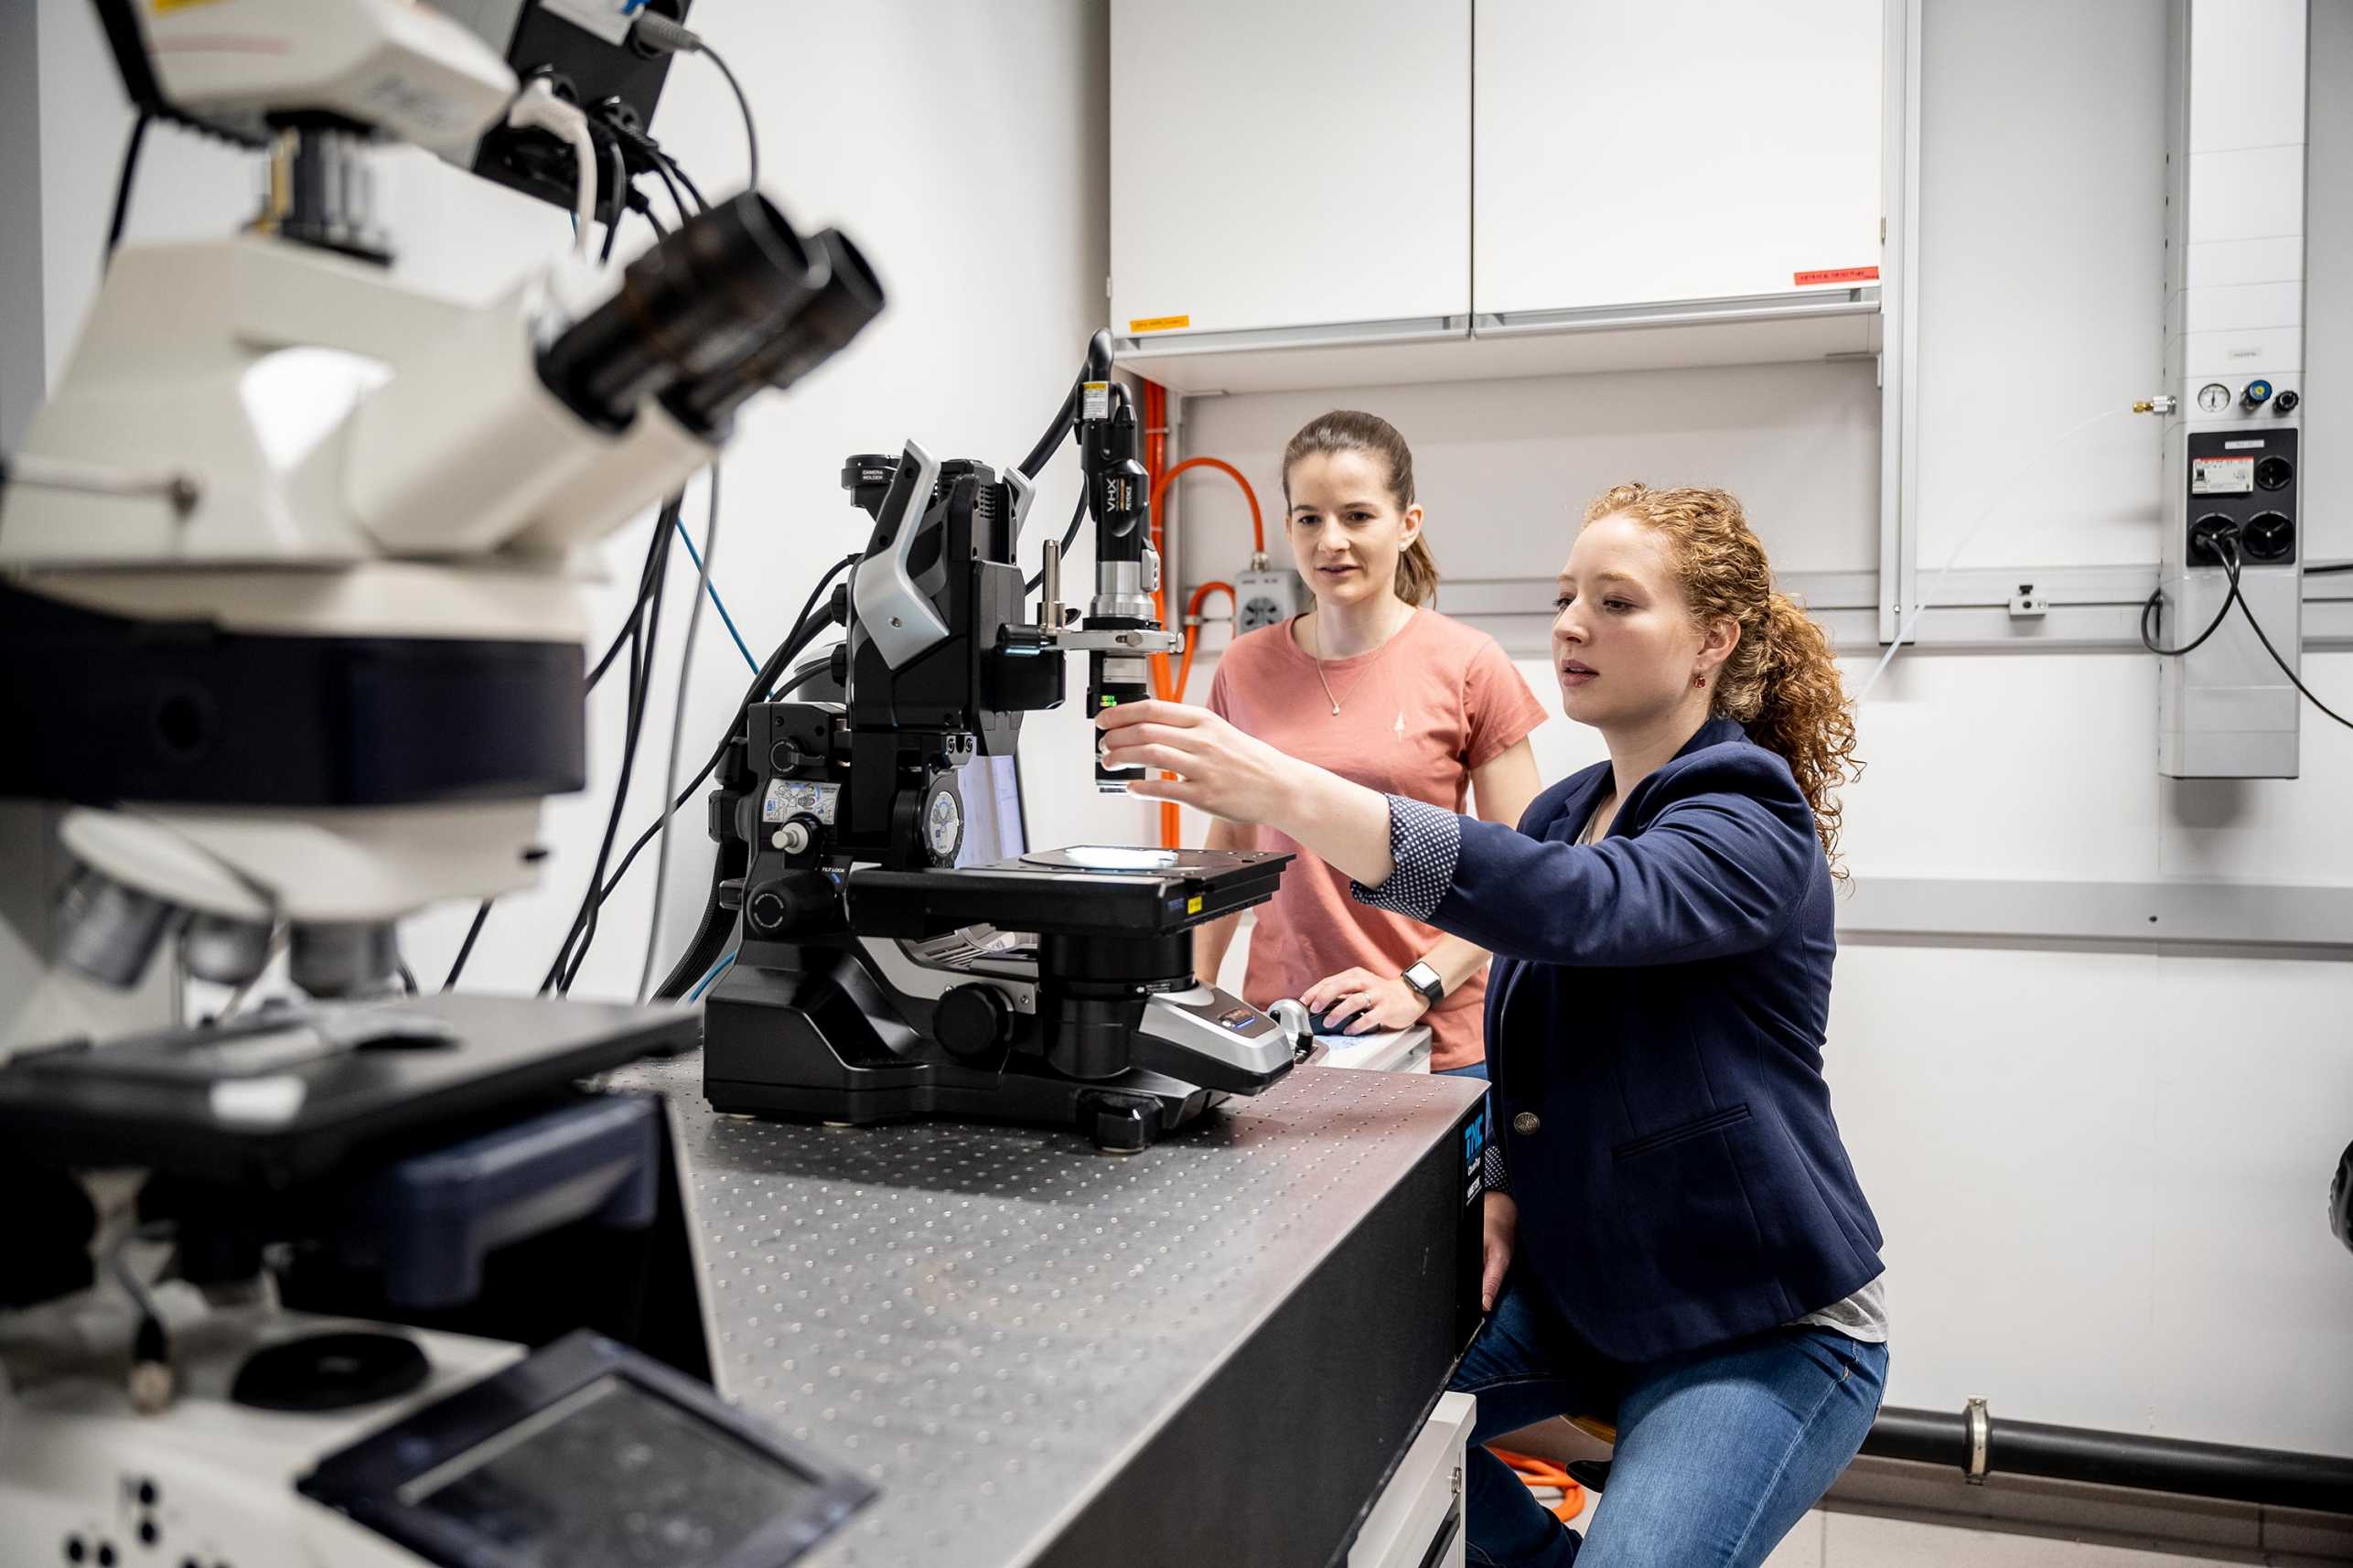 Nicole Kleger and Simona Fehlmann in the lab, working with a microscope